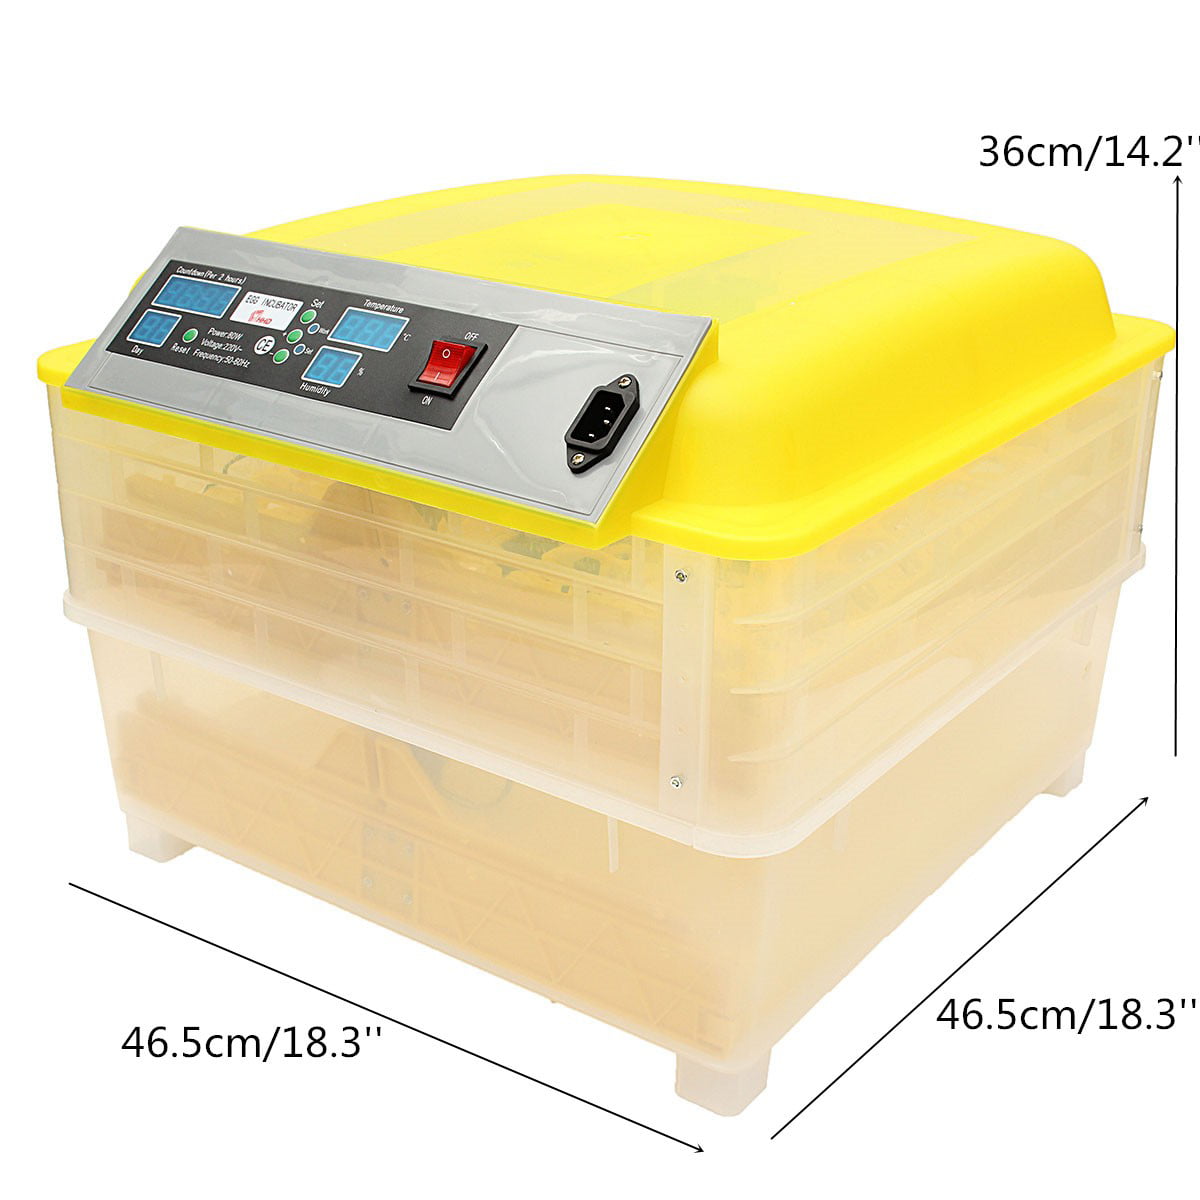 110V Auto Poultry Incubator 96 Eggs Capacity Hatcher Turning Temperature Control 